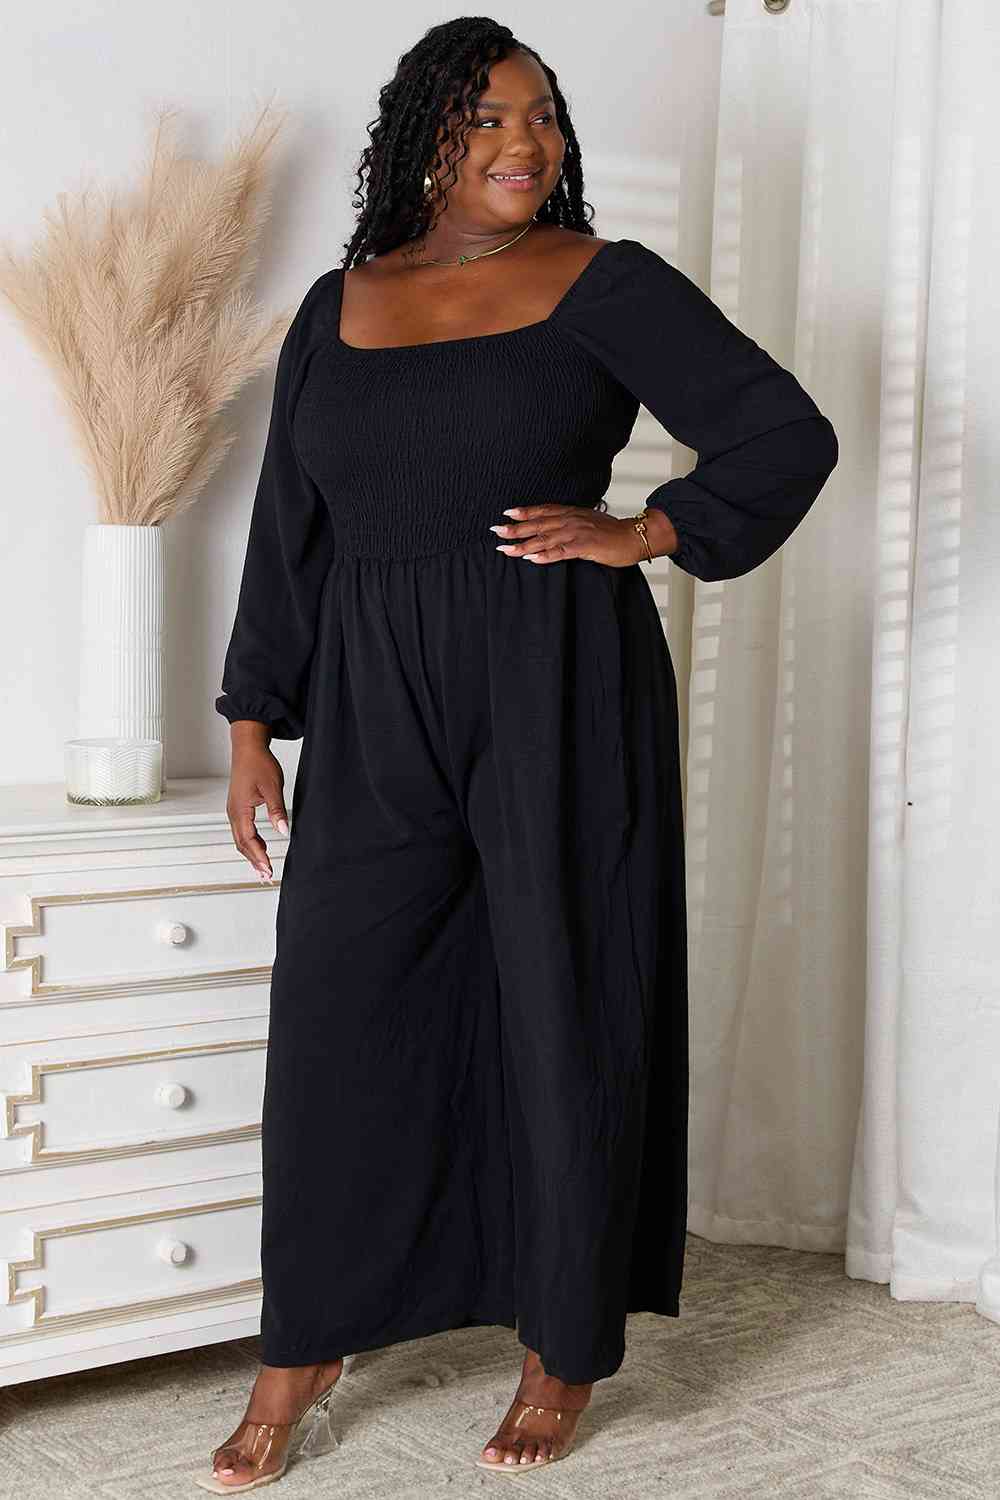 Double Take Black Smocked Square Neck Jumpsuit with Pockets Jumpsuits & Rompers jehouze 